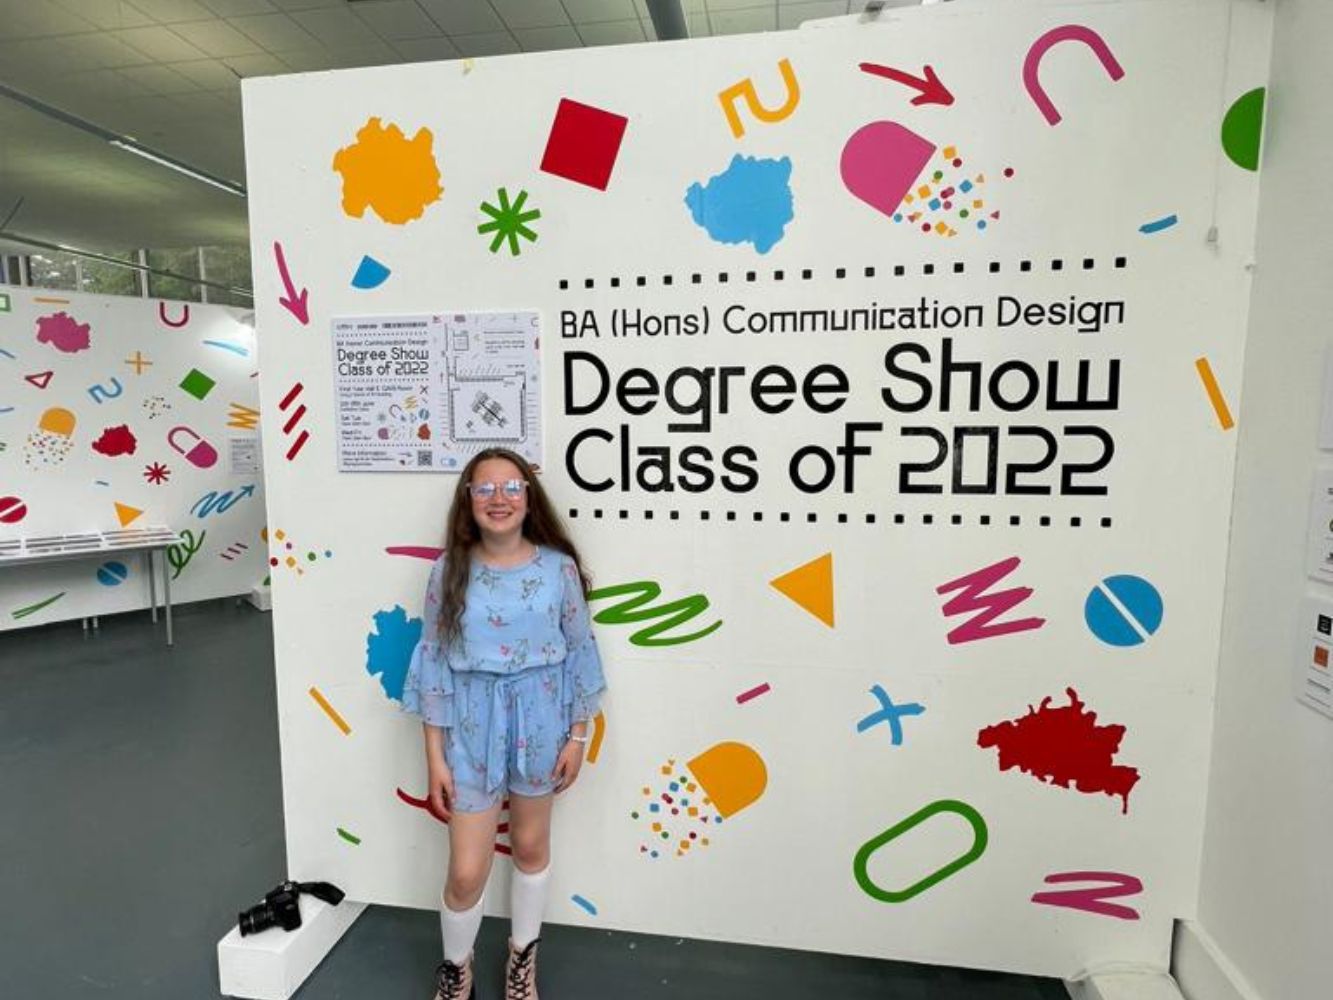 Kitty Donovan stands in front of Degree Show signage